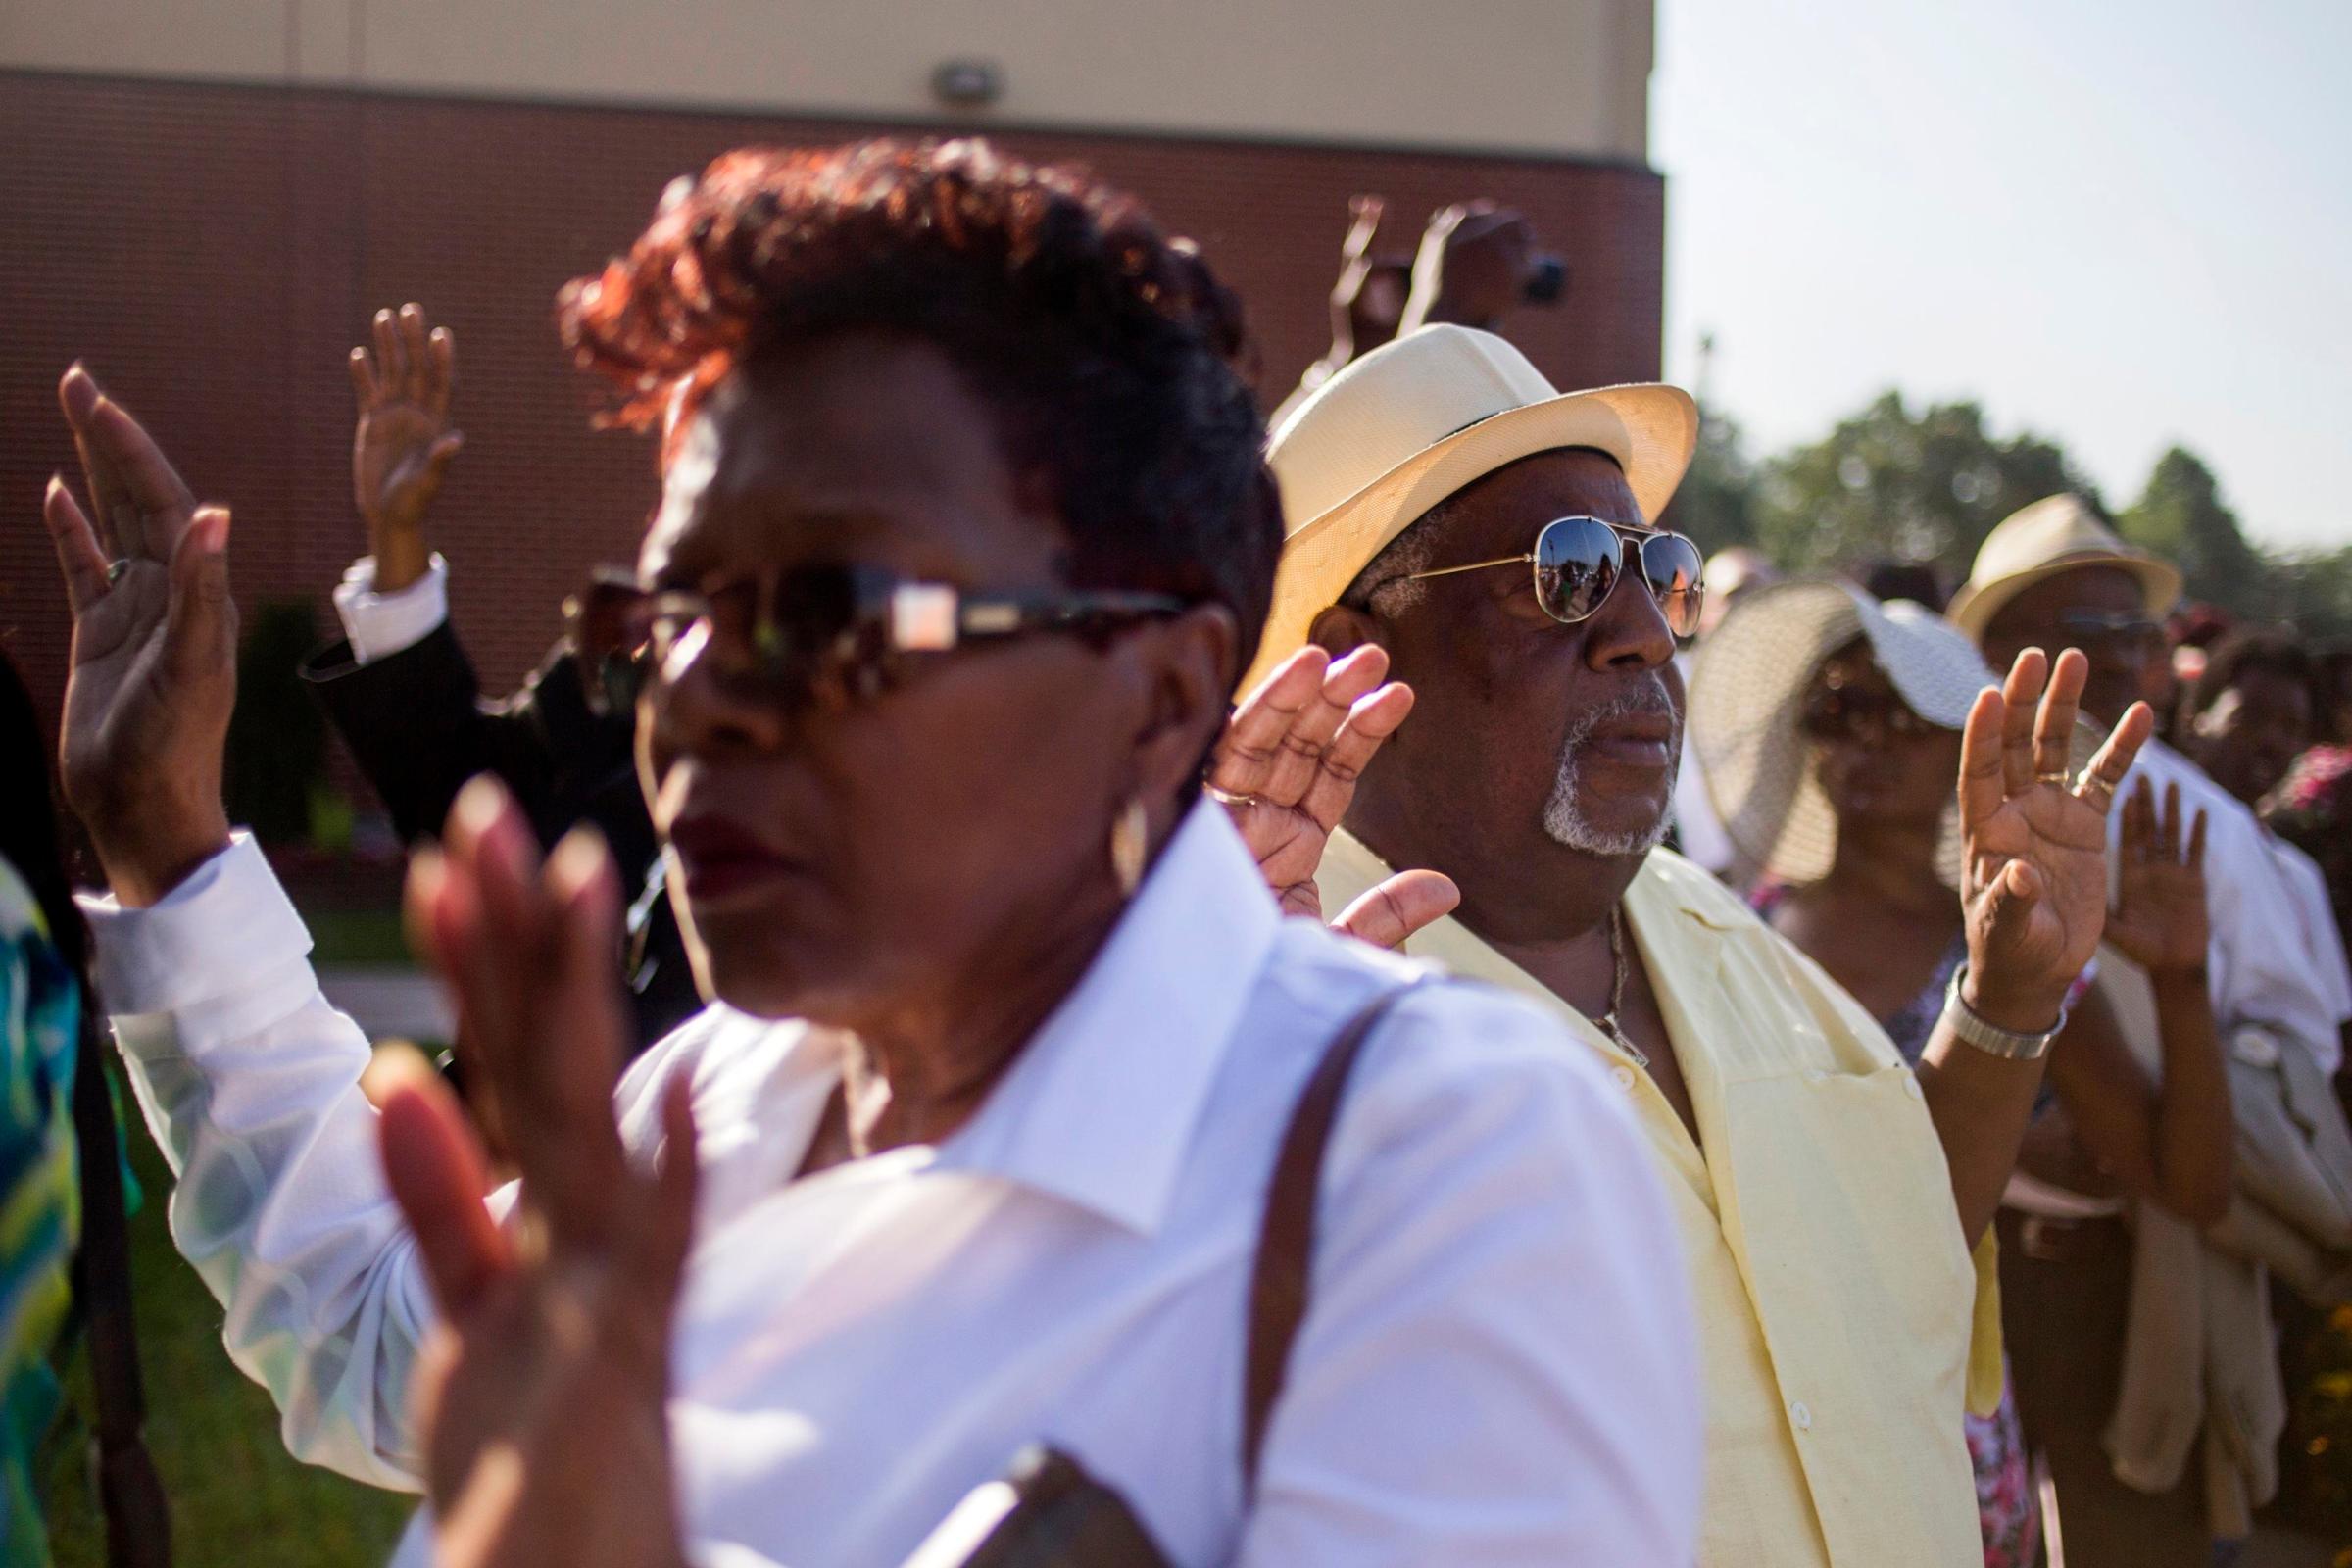 Attendees hold their hands up as some chant "Hands up don't shoot," while they wait in line to take part in the funeral services for 18-year-old Michael Brown at the Friendly Temple Missionary Baptist Church in St. Louis, Missouri